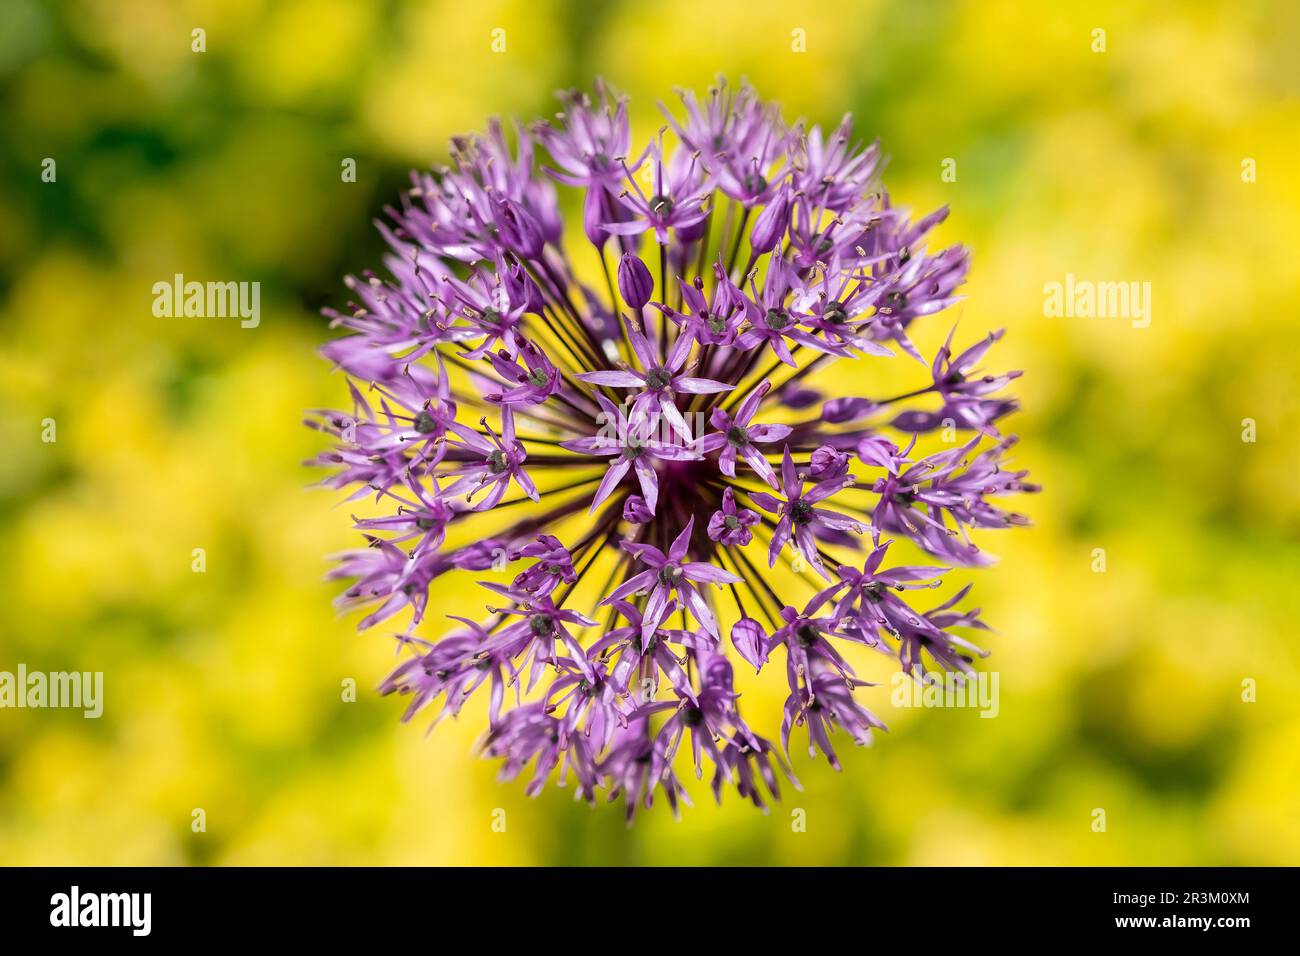 A close up image of a single Onion, Allium Cepa, flower head in full bloom. The purple flower head is set against a low growing yellow flowering plant Stock Photo